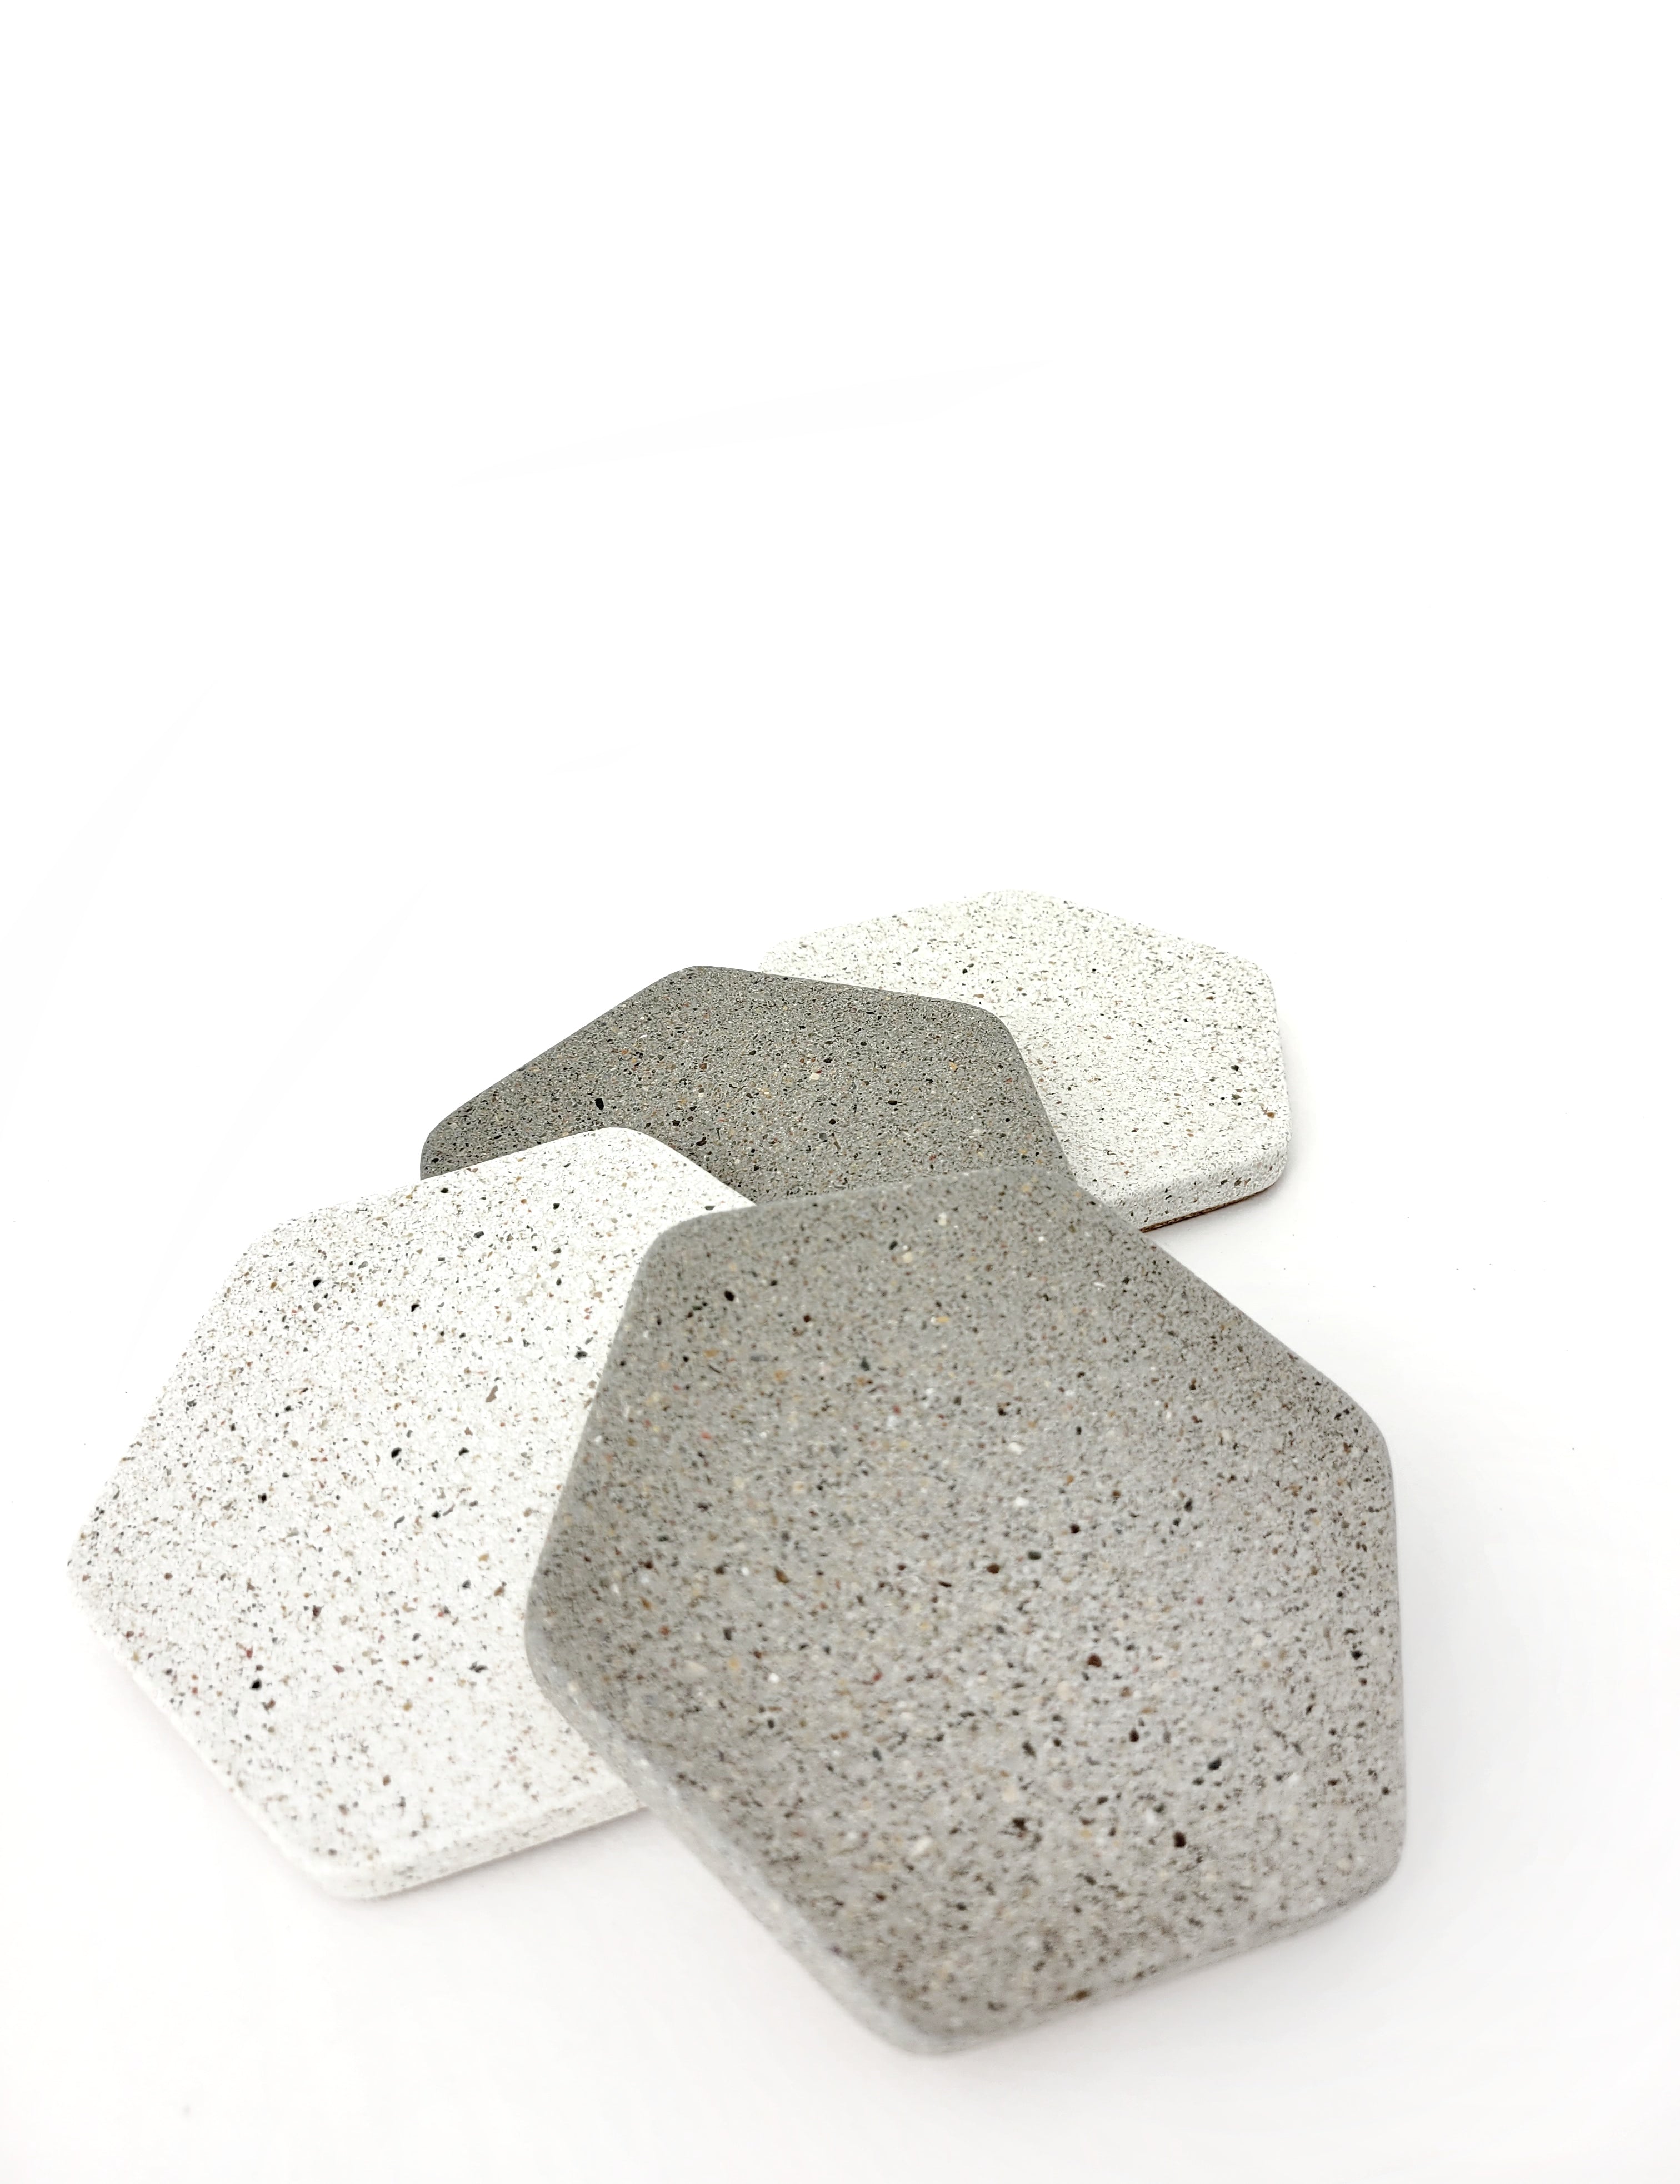 Two grey and two white hexagon sandstone coasters arranged vertically, alternating between grey and white.